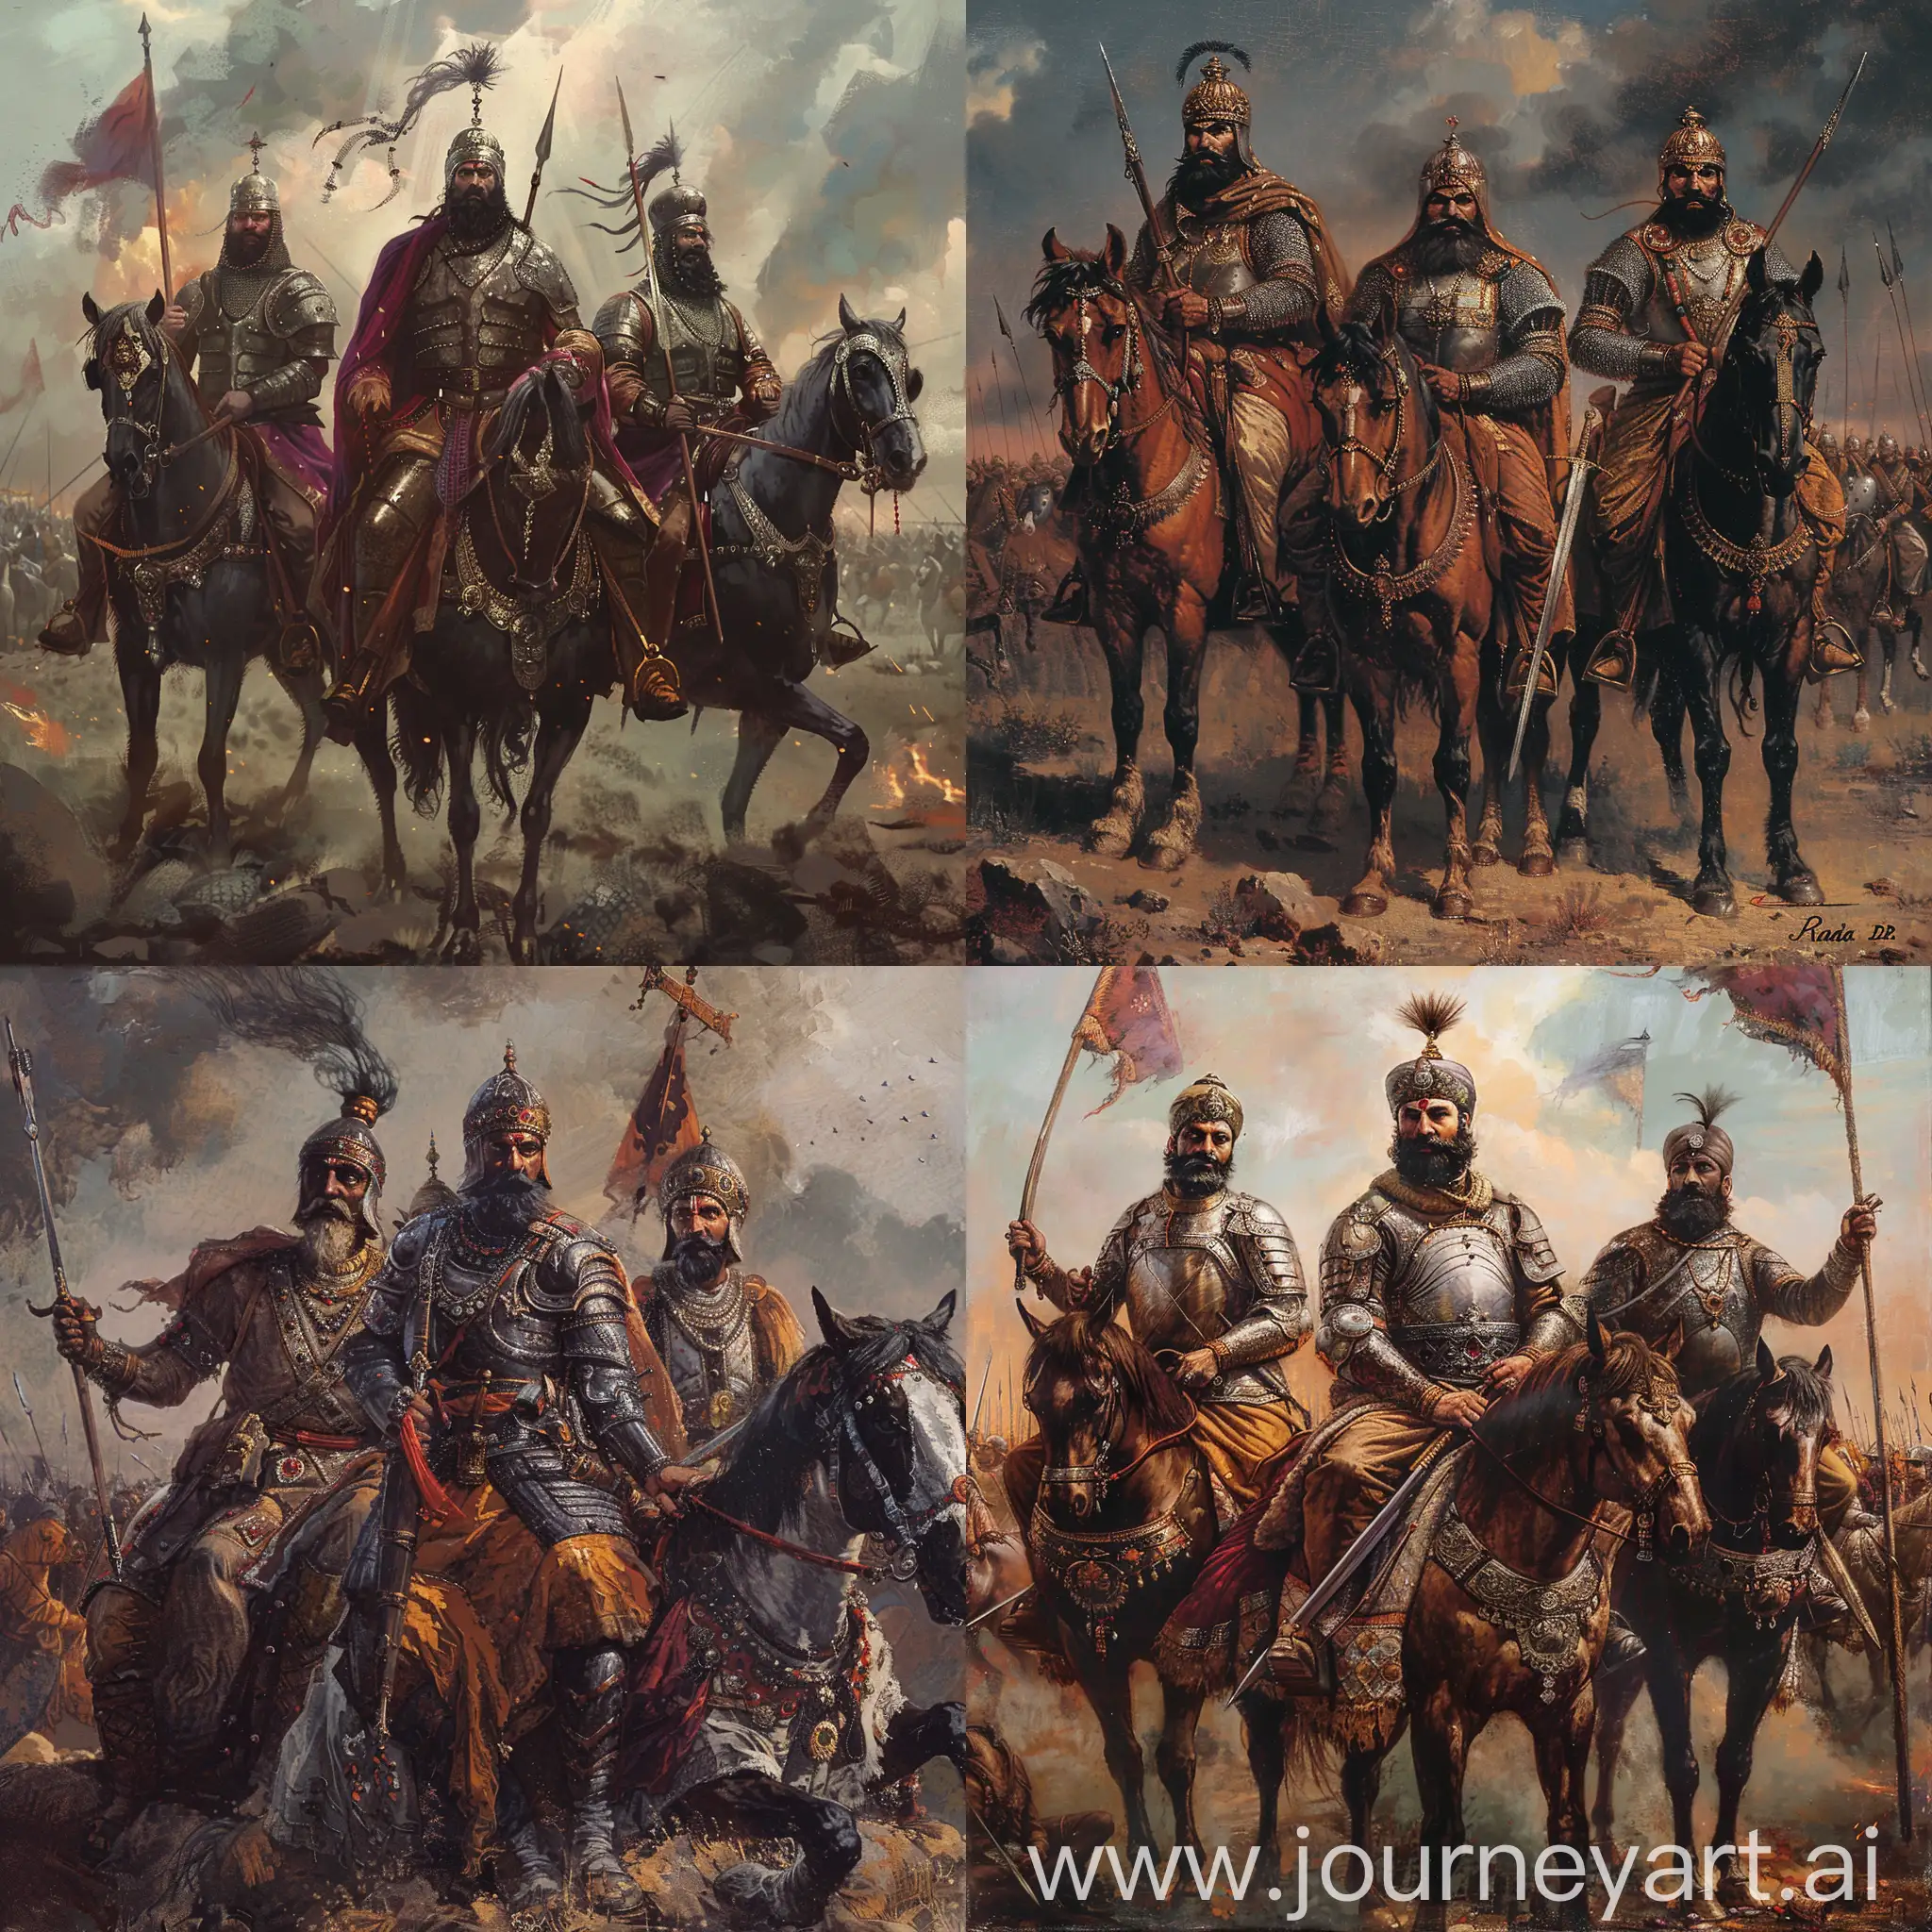 The year is 1498 CE. Imagine 3 rajput rajasthani kings who are fierce, calm and wearing armor, holding their swords or lances. They are sitting on their horses standing in a battlefield and looking at something.